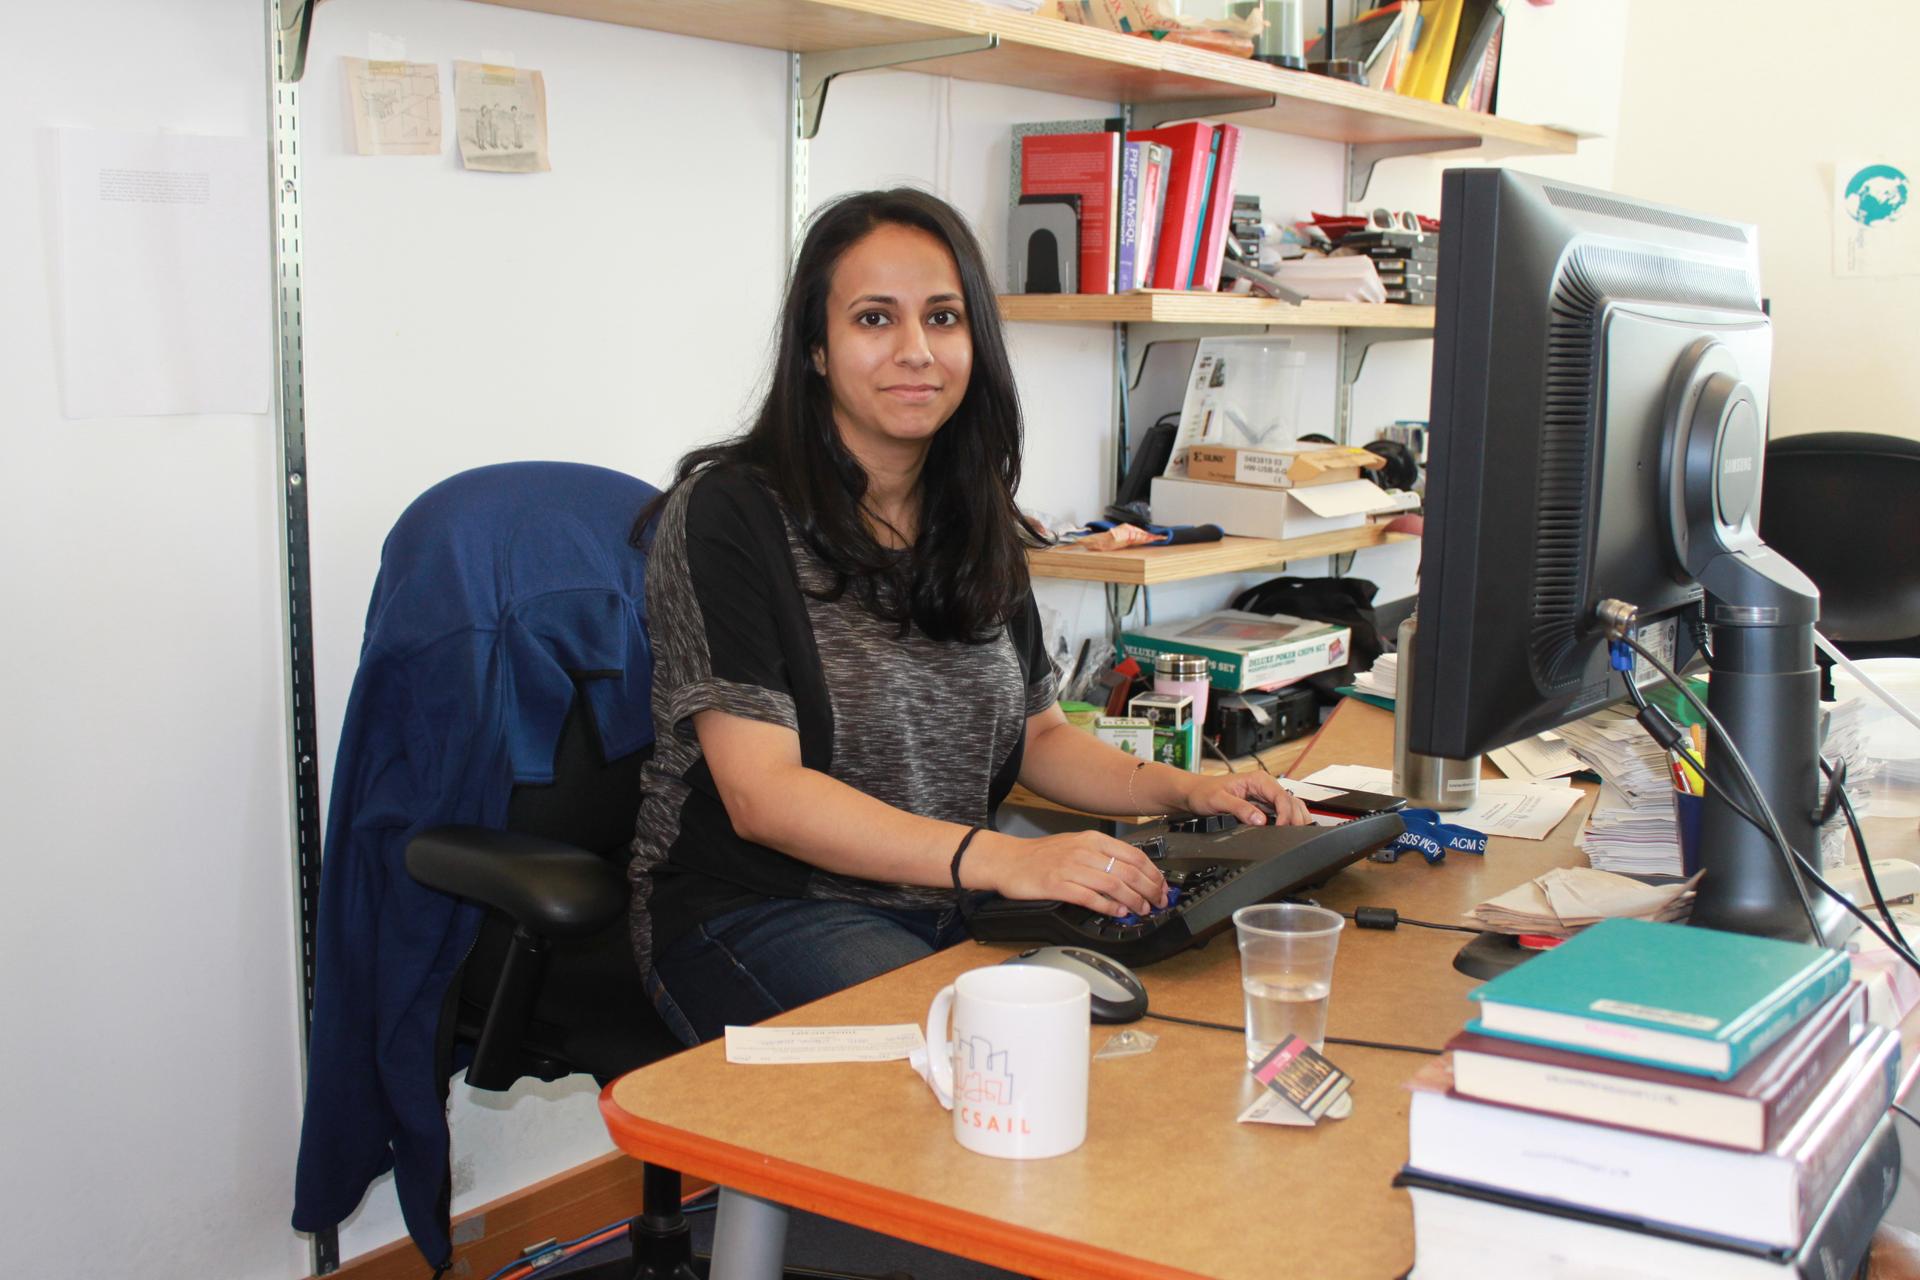 Neha Narula just finished her PhD at MIT. She says early mentoring was essential to her career in computer science.